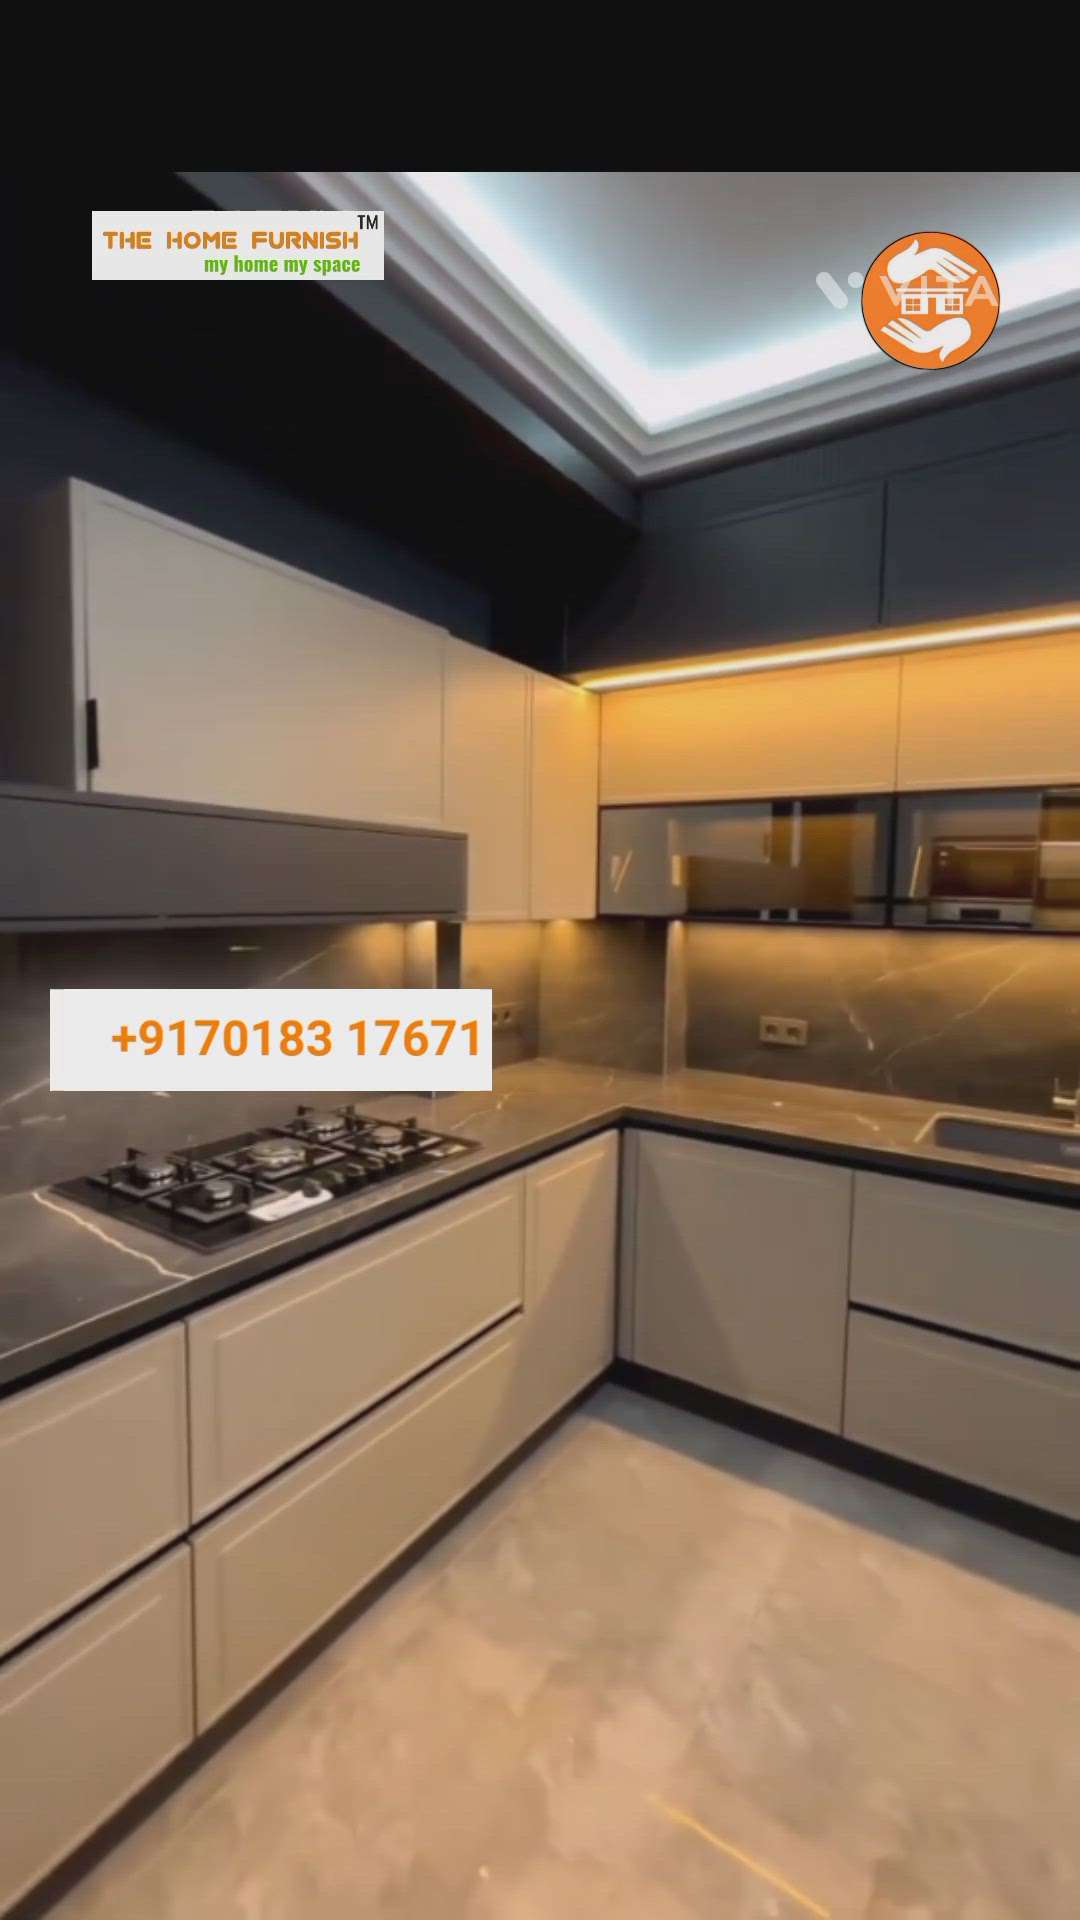 Next Generation Kitchen! Indian Style...Exclusive collection of Modular Kitchen designs at THE HOME FURNISH.  Explore the latest modular kitchen designs & consultations. Inquiry Please Contact! https://wa.me/c/917018317671
#kitchen #modularkitchen #chimney #kitchendesign #kitcheninteriordesign #kitchendesignideas  #interiordesigner #interiordesigner #interiordecorating #interiordesign #interiors #architecture  #MasterBedroom